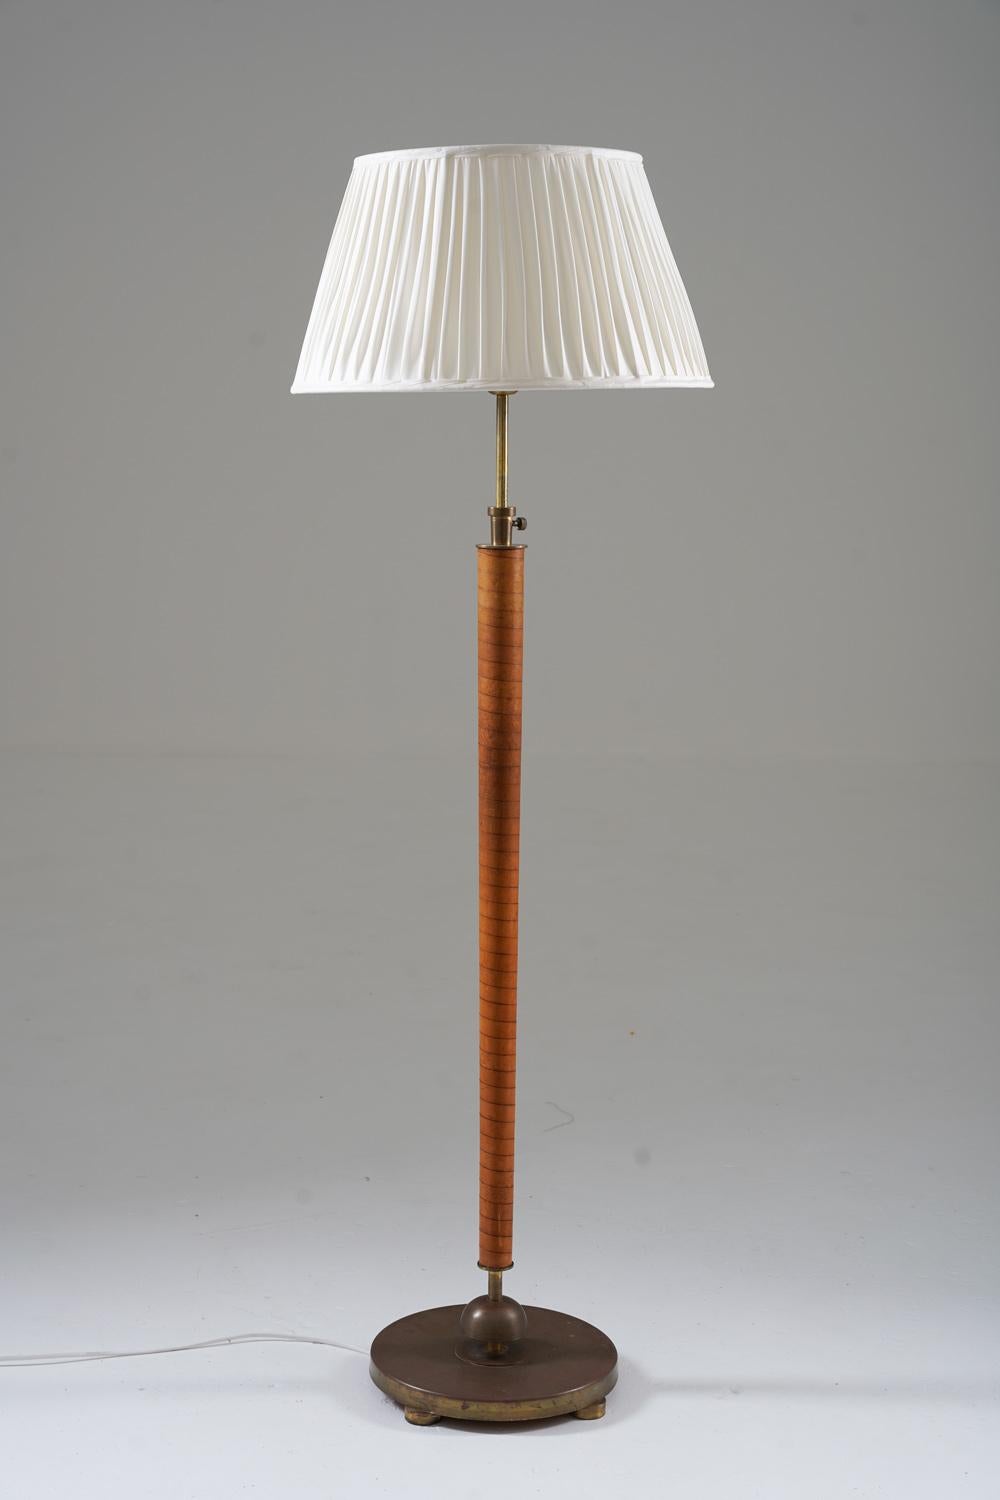 Scandinavian floor lamp manufactured in Sweden, 1930s.
Beautiful floor lamp made in beautiful materials. The foot is made of brass, supporting the base, which has a beautiful leather webbing. The height of the lamp is adjustable.

Condition: Very